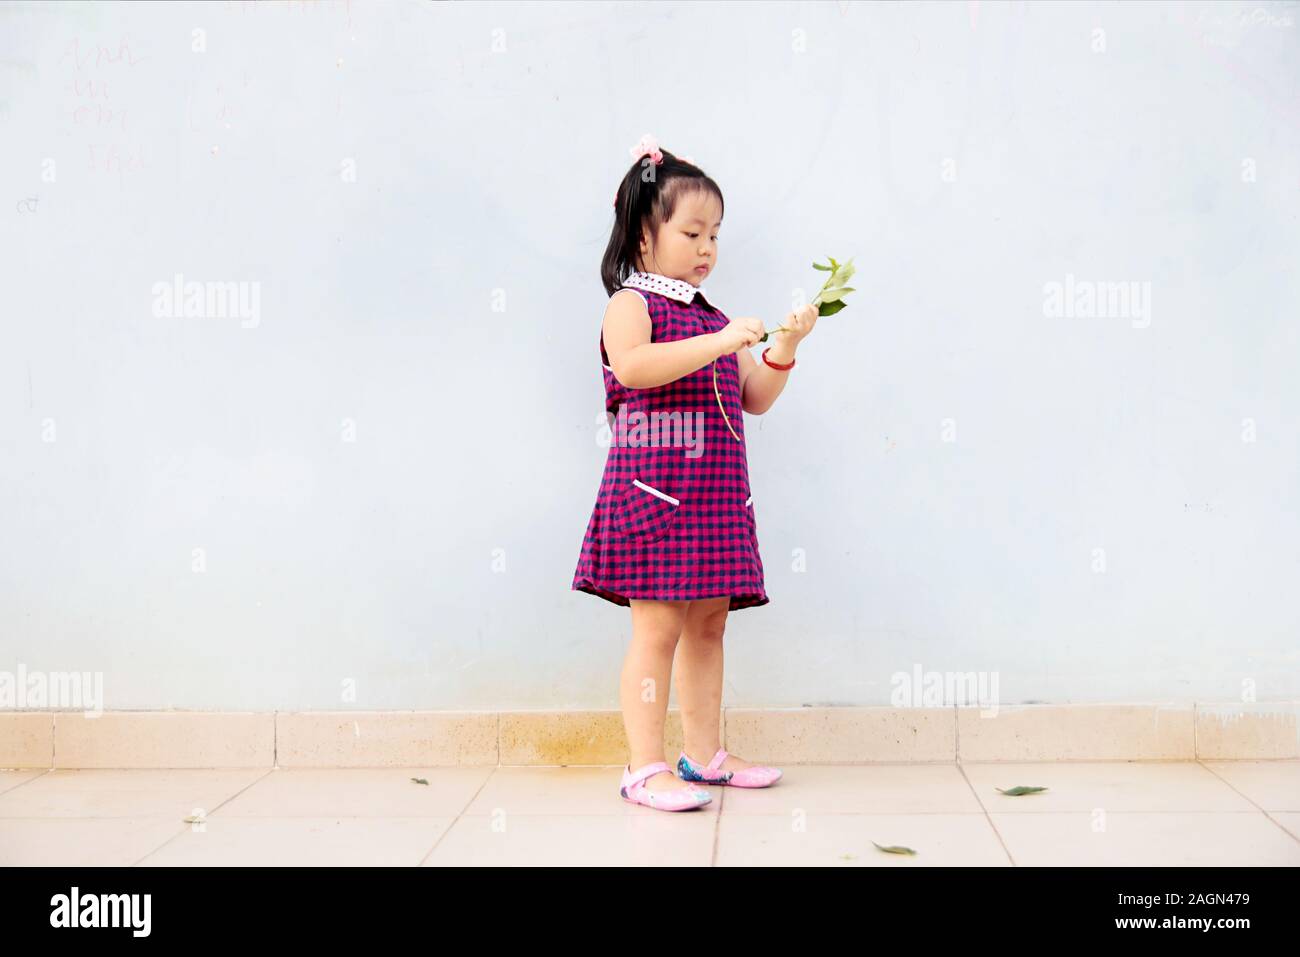 Liitle asian girl standing alone and holding a small plant in the hand Stock Photo